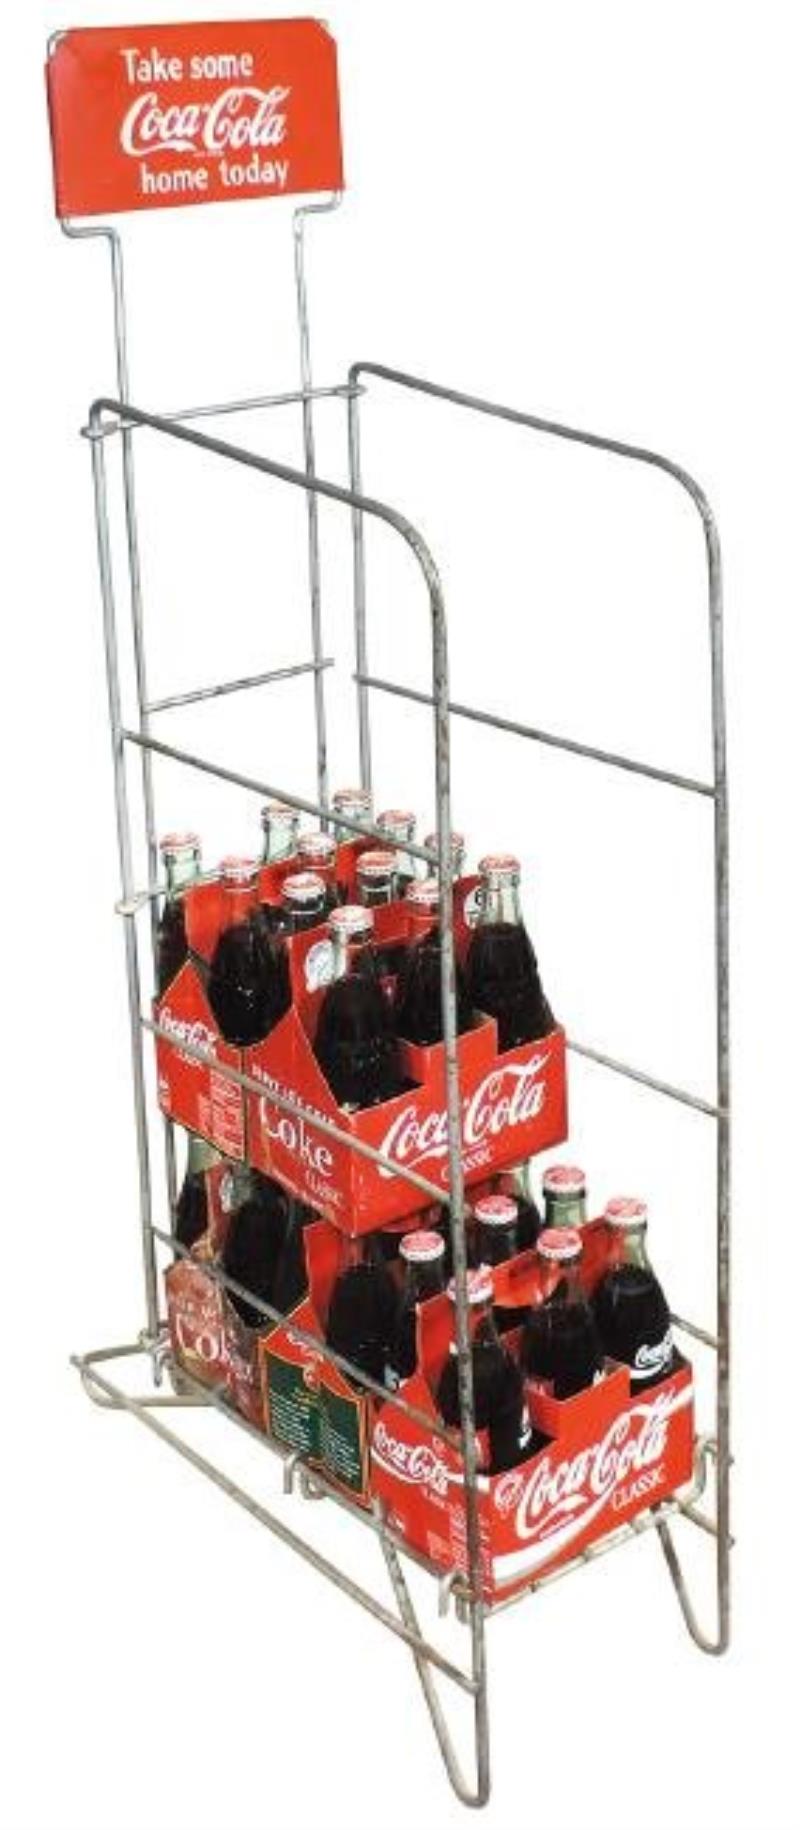 Coca-Cola bottle display rack, "Take some home today",